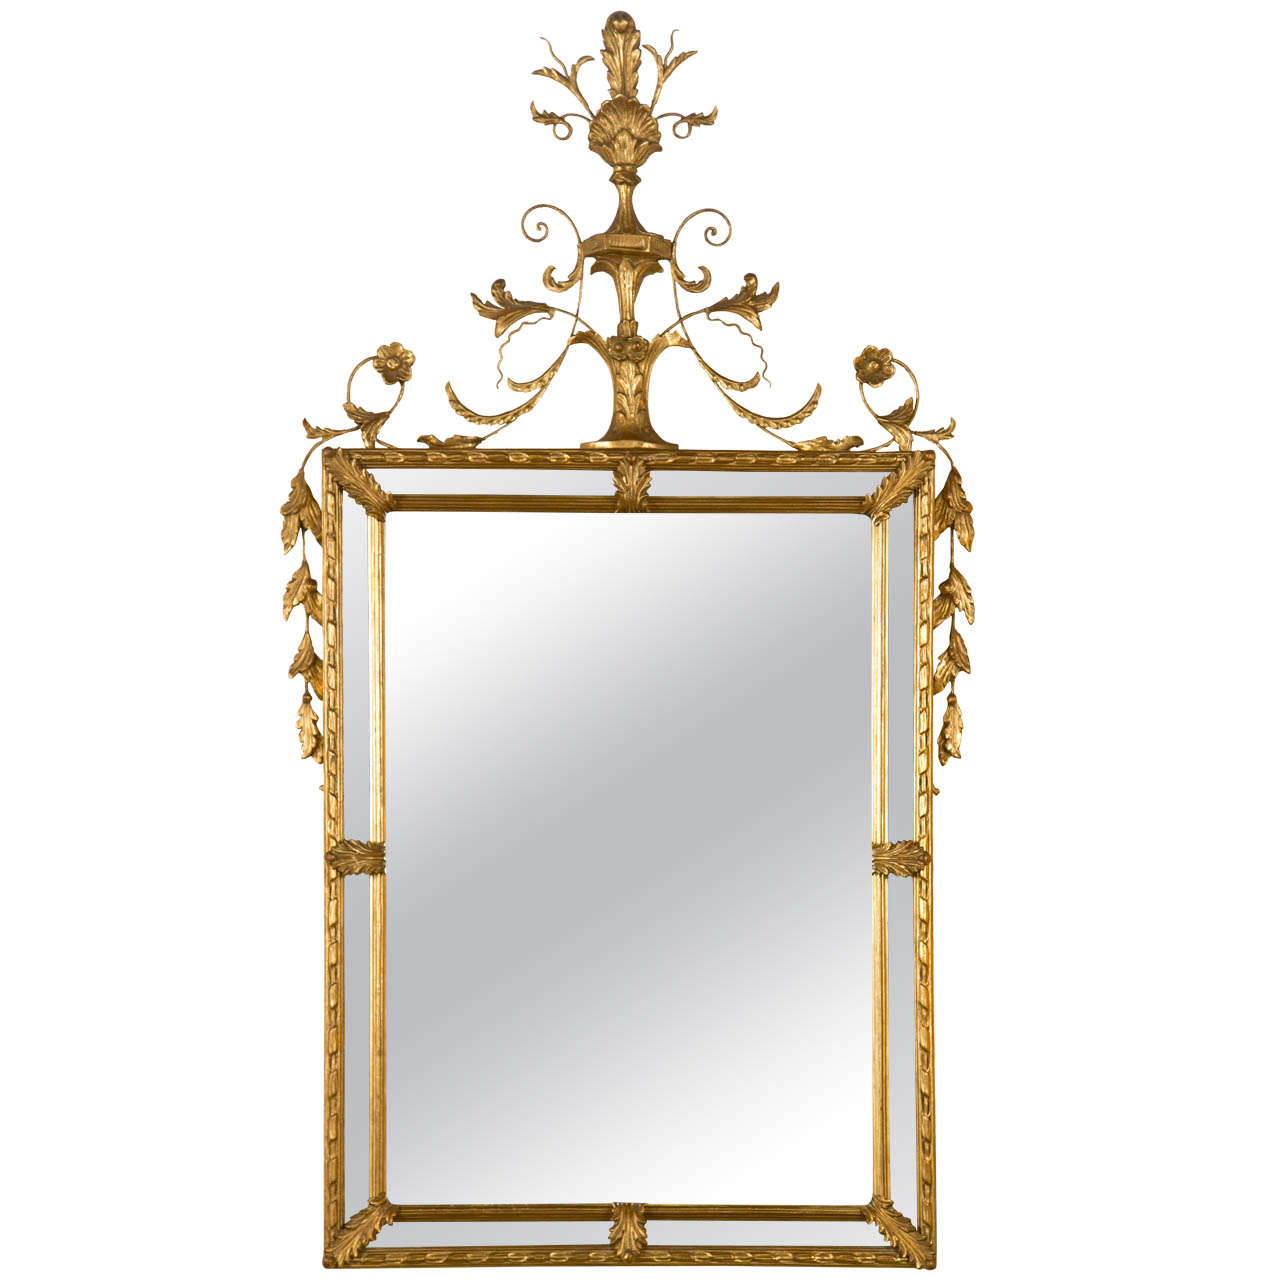 French Classical Style Gilded Mirror